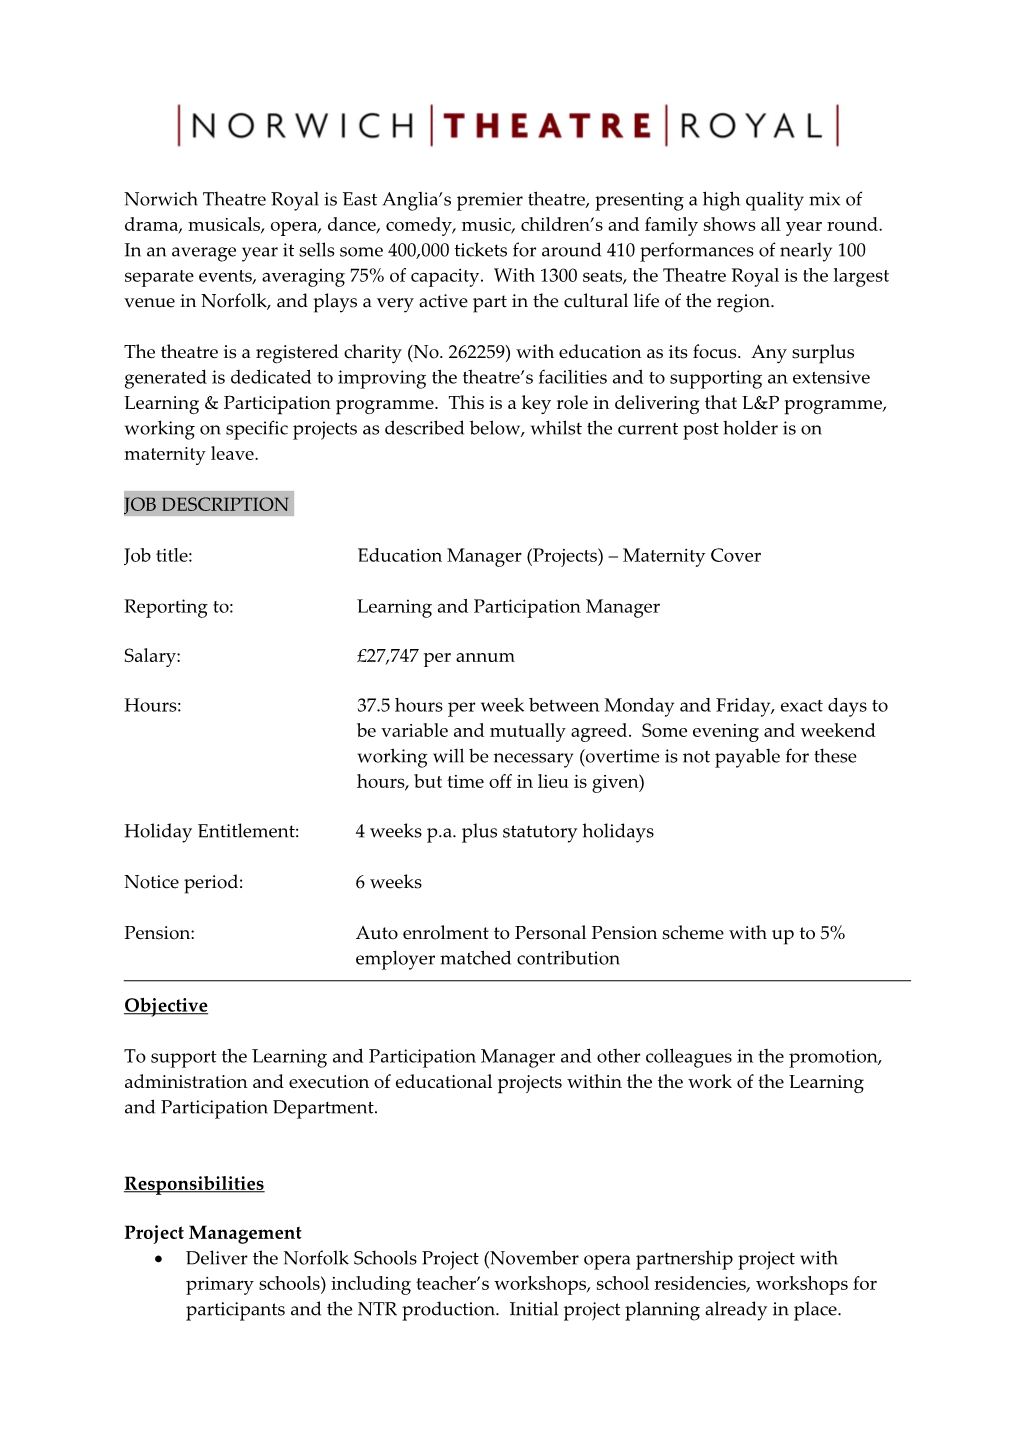 Job Title:Education Manager (Projects) Maternity Cover